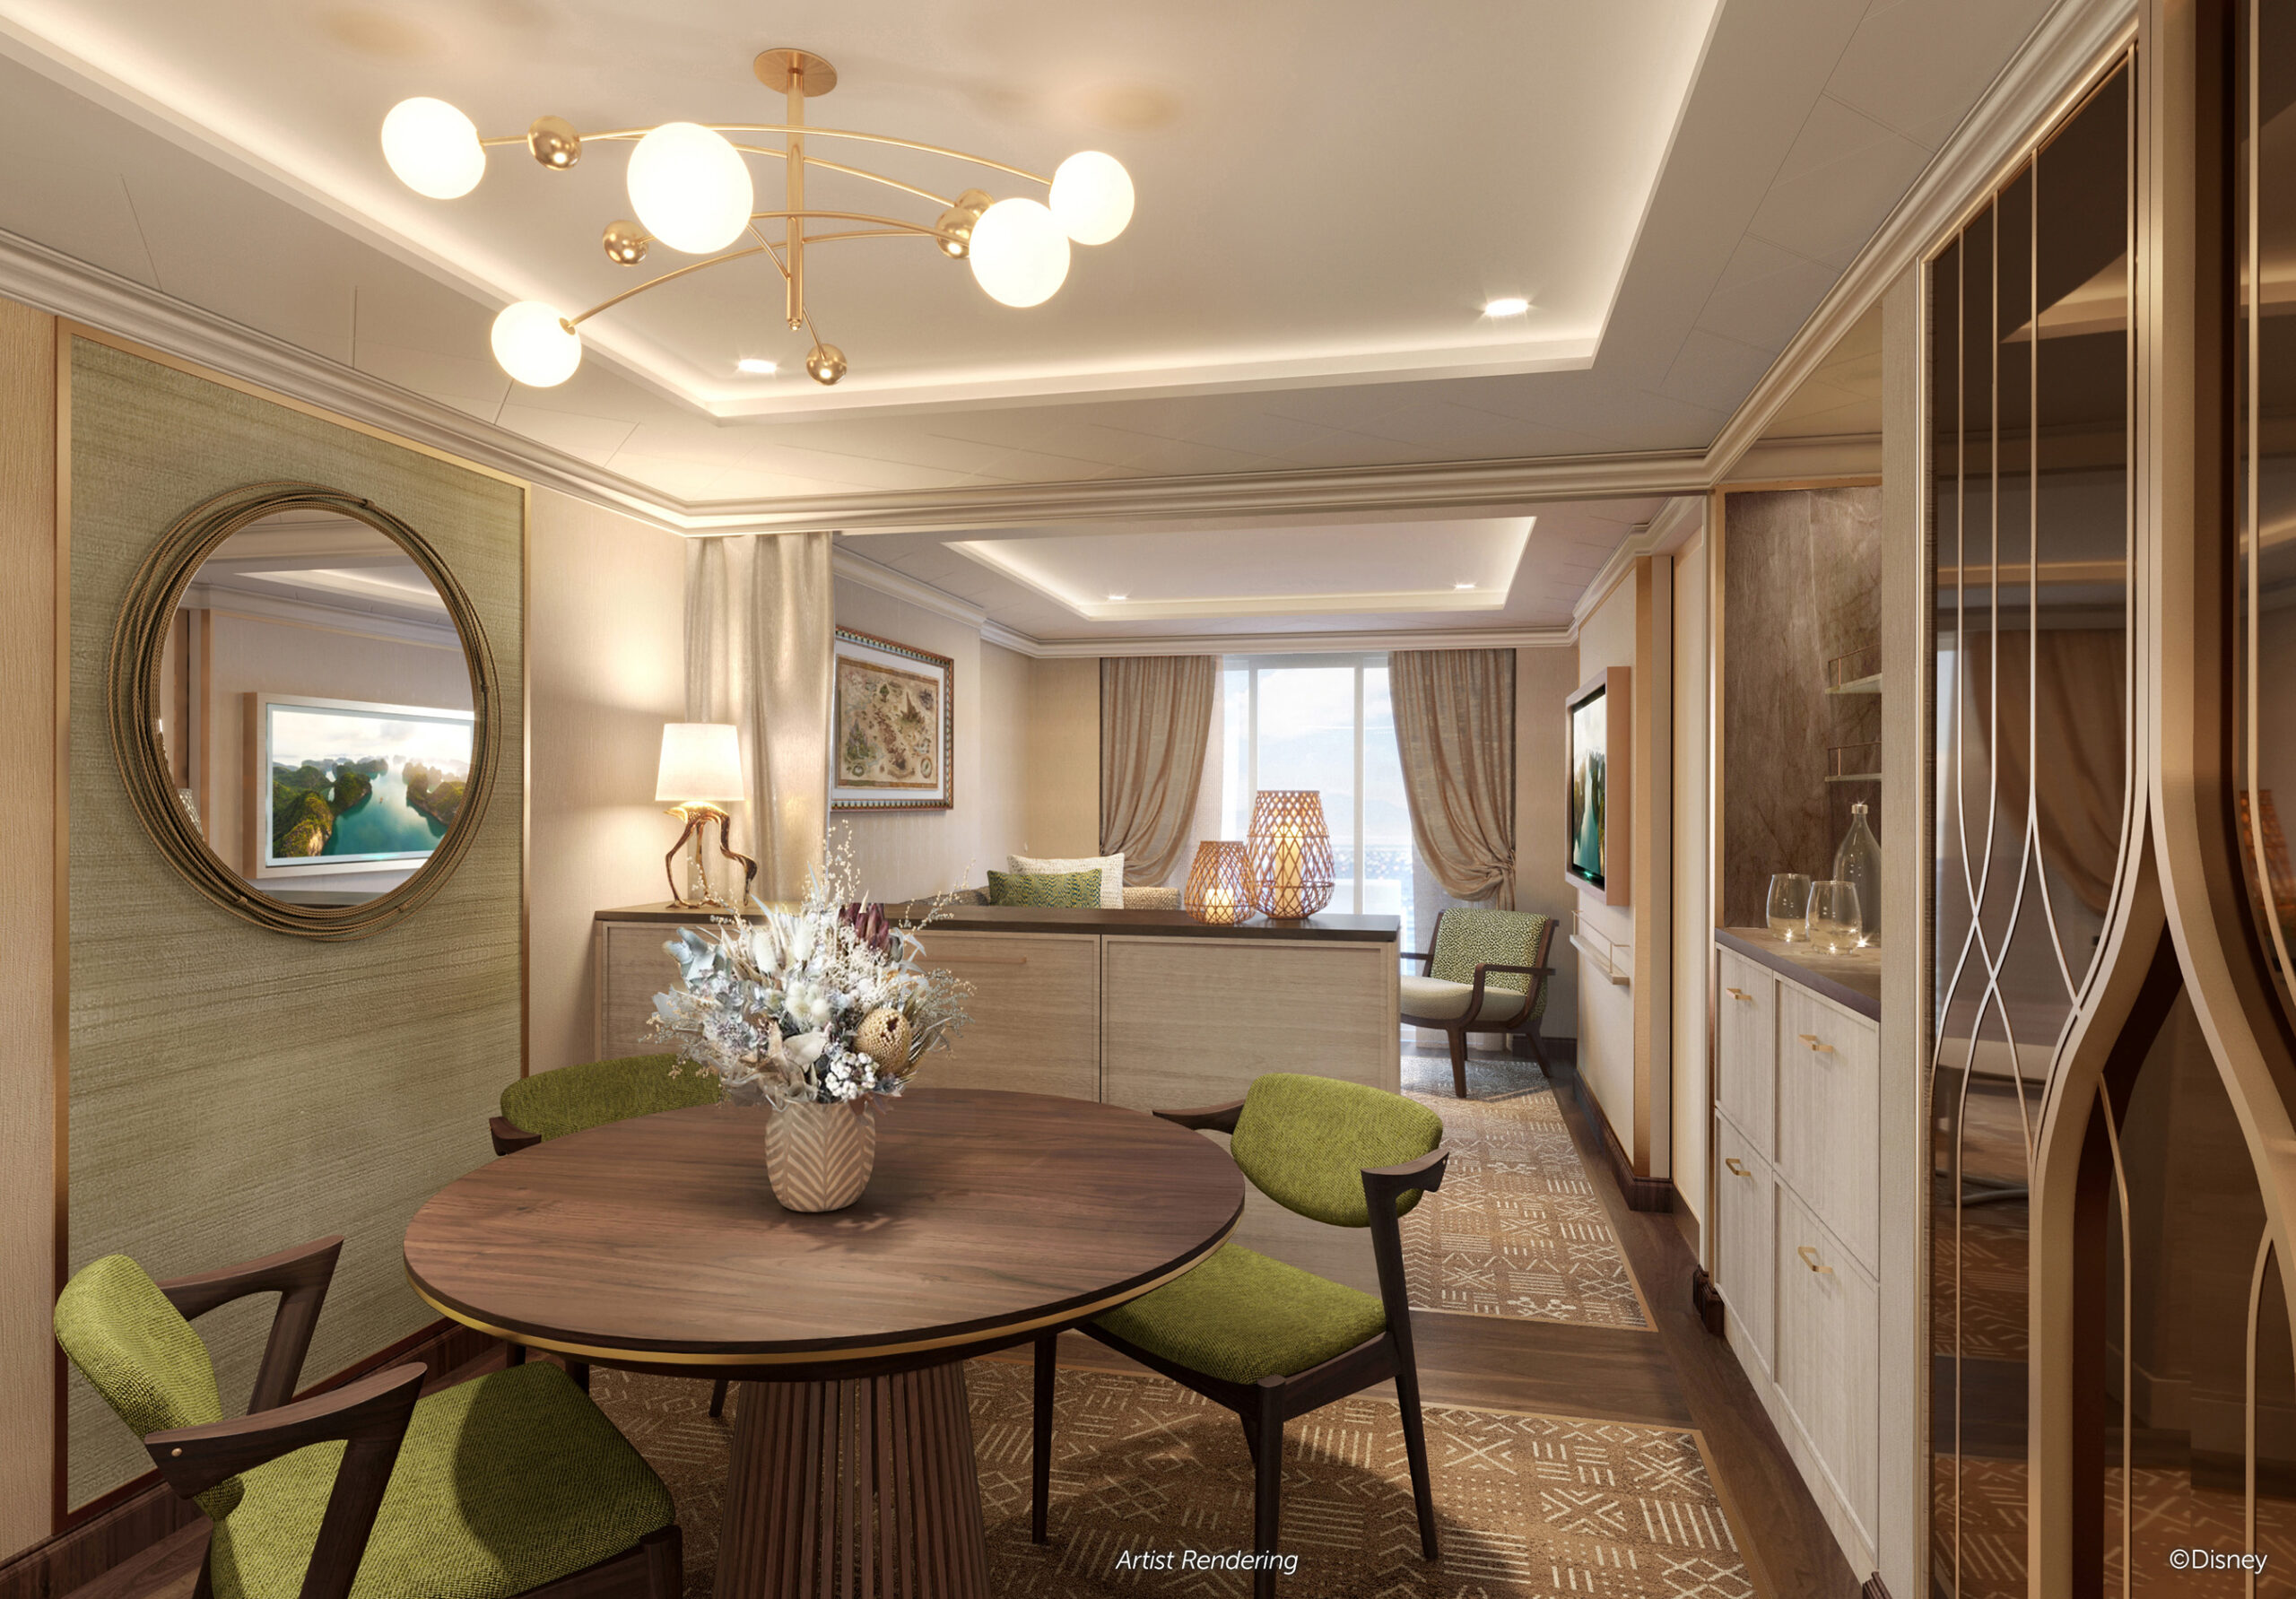 Disney Treasure’s concierge level suites will feature elegant interiors inspired by the majestic grasslands Simba calls home in Walt Disney Animation Studios’ “The Lion King.” The design will feature themed artwork, mosaics and a harmonious color scheme, and the staterooms and suites will offer an exclusive concierge lounge with a private sun deck. (Disney)